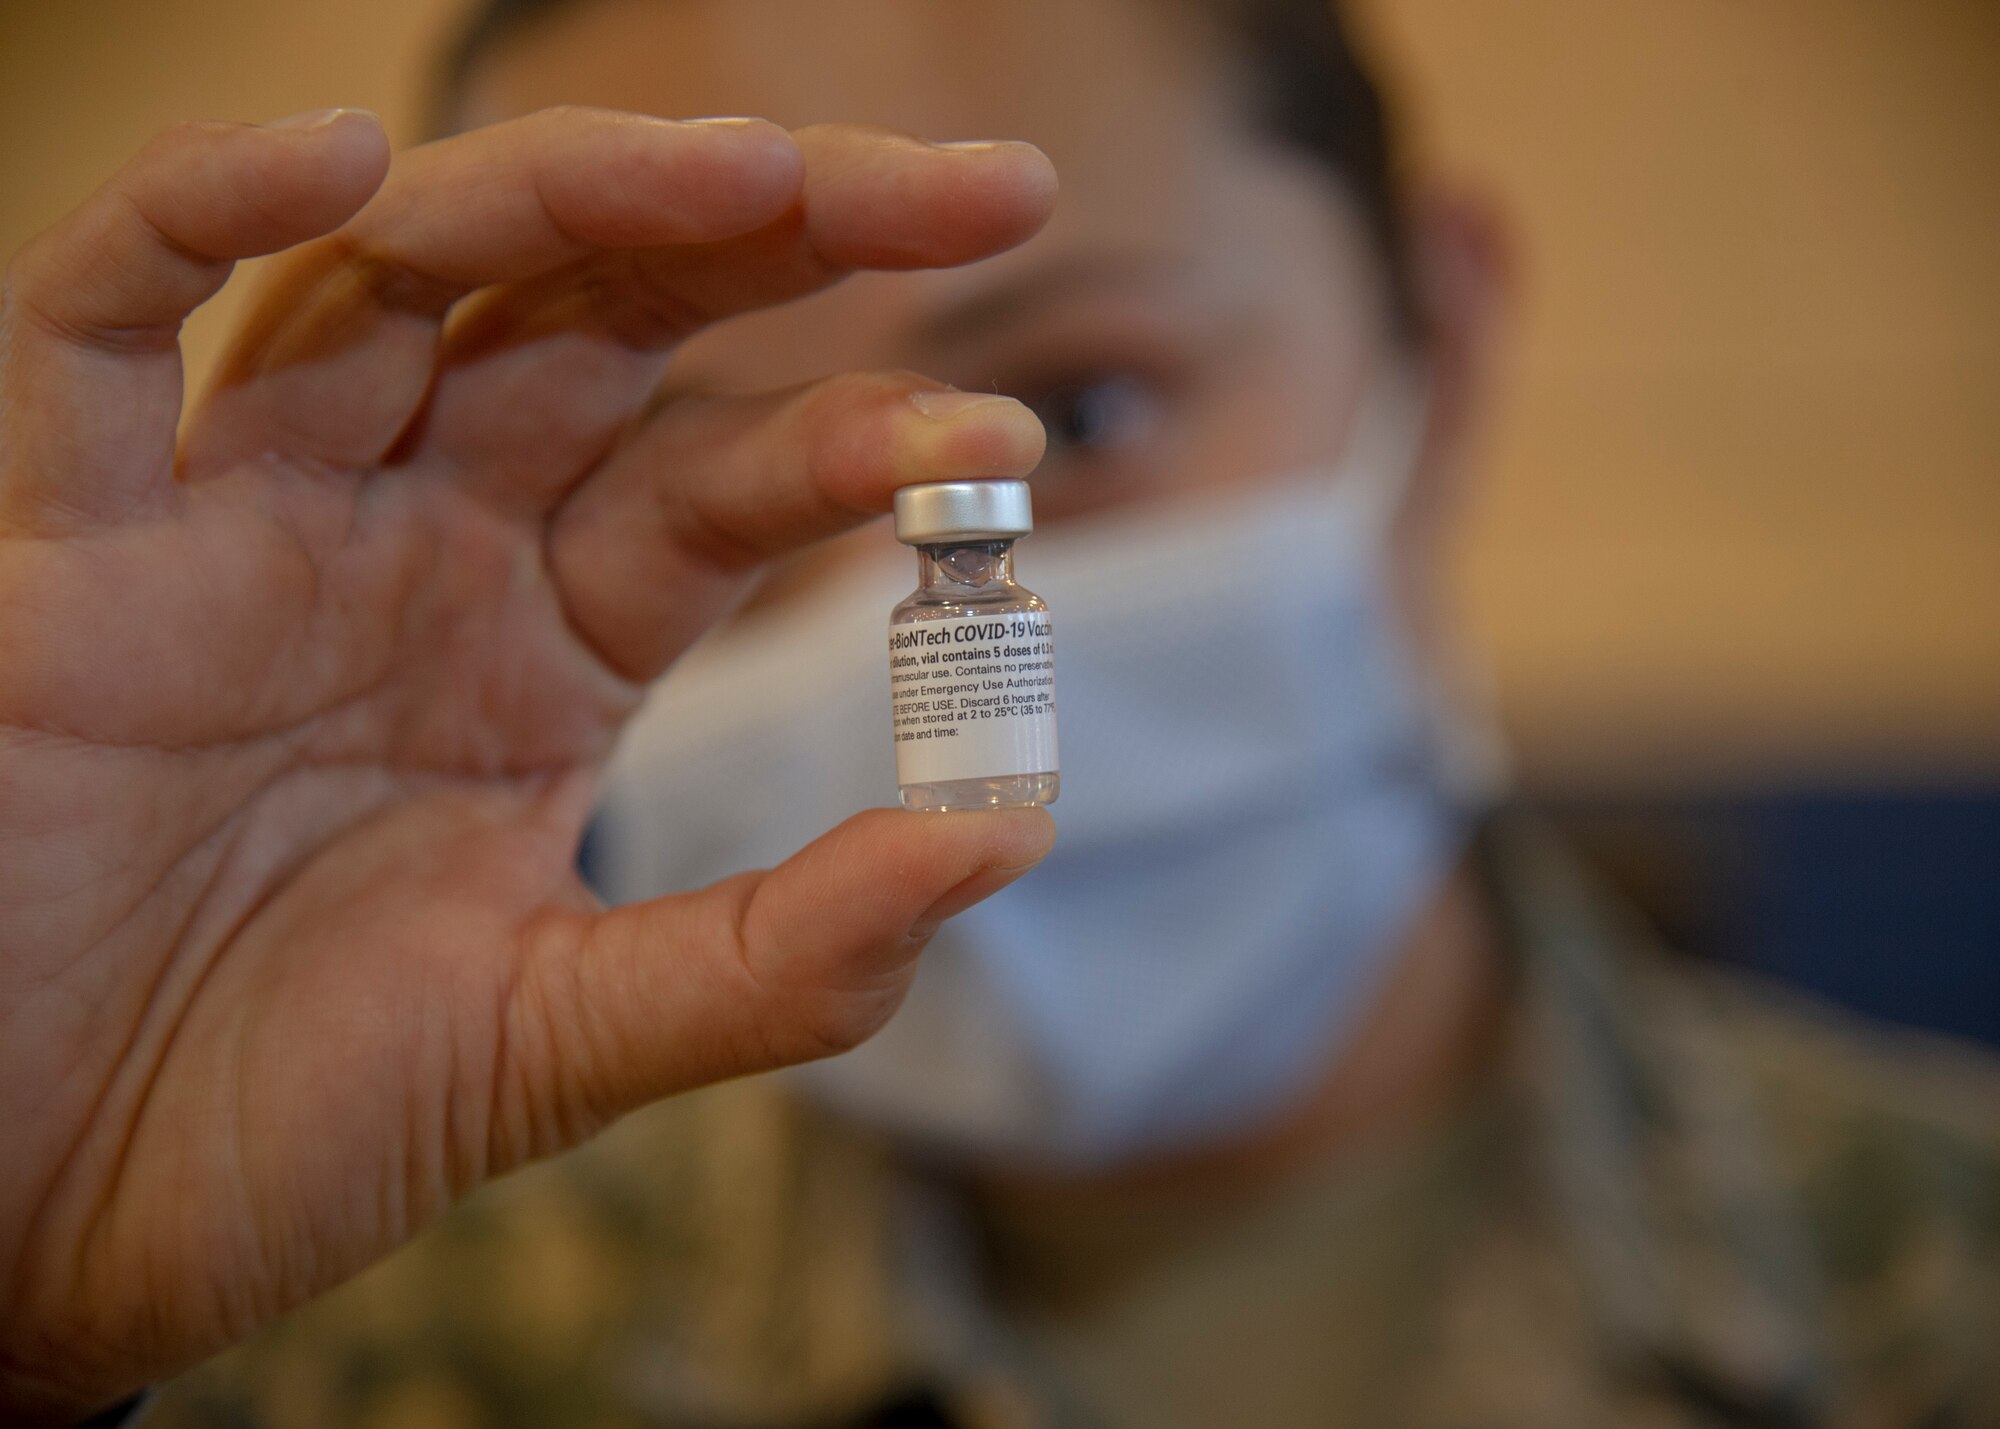 U.S. Air Force Tech. Sgt. Shannon Guerrero, 624th Aeromedical Staging Squadron (ASTS) medical technician, prepares a COVID-19 vaccine needle at a temporary vaccination site at Hickam Memorial Fitness Center on Joint Base Pearl Harbor-Hickam, Hawaii, Jan. 22, 2021.